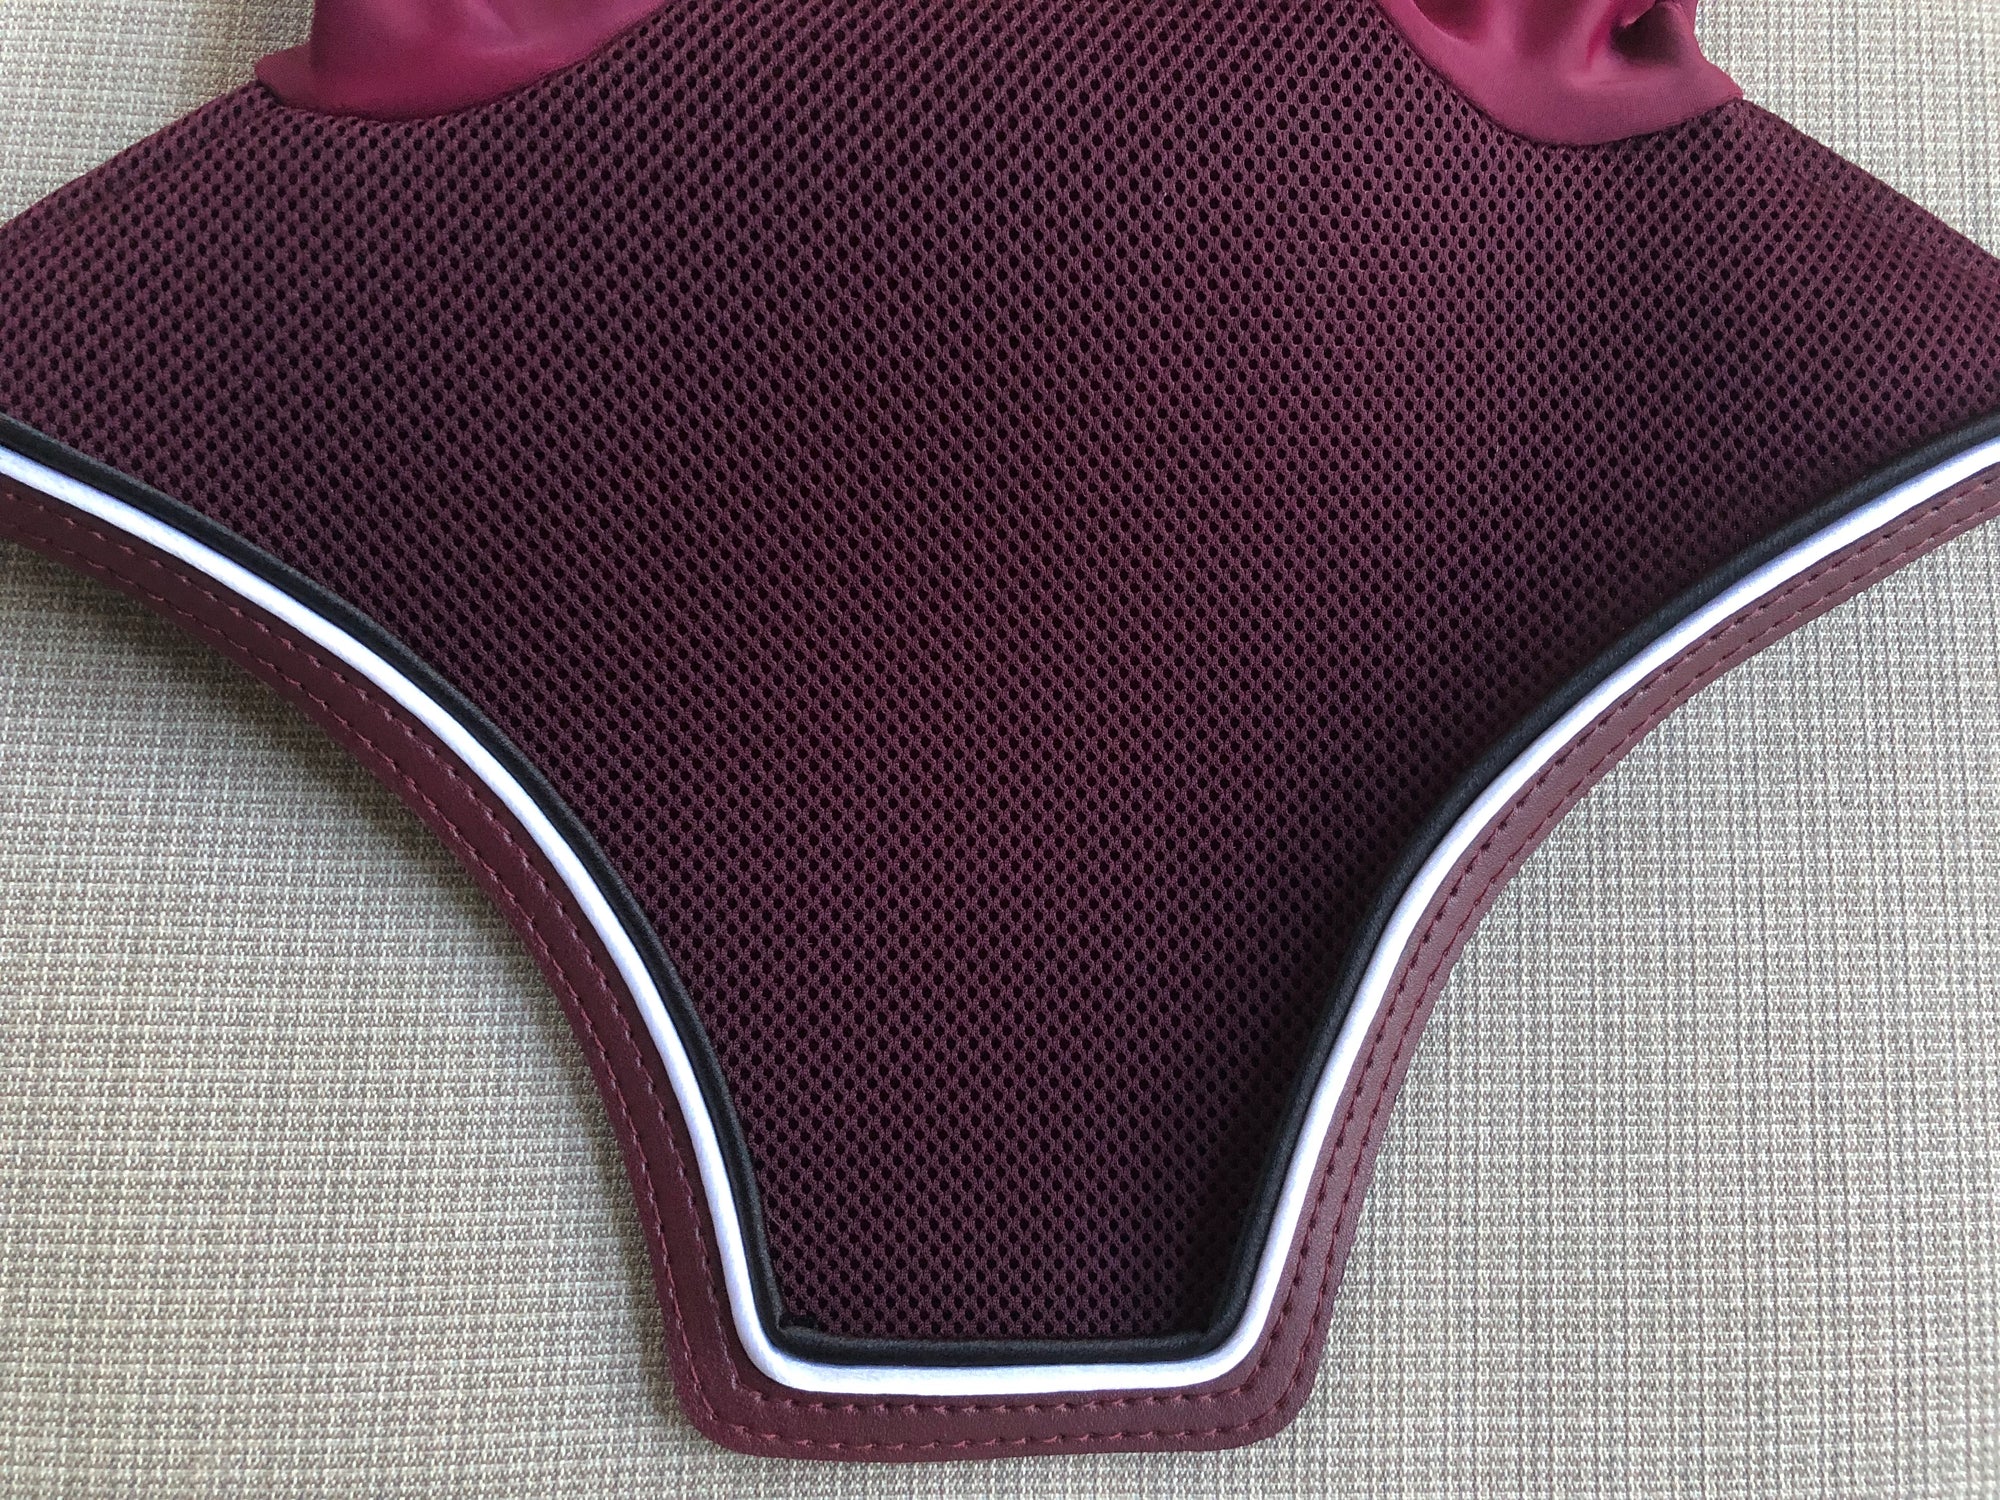 Burgundy Bonnet with White and Black Piping